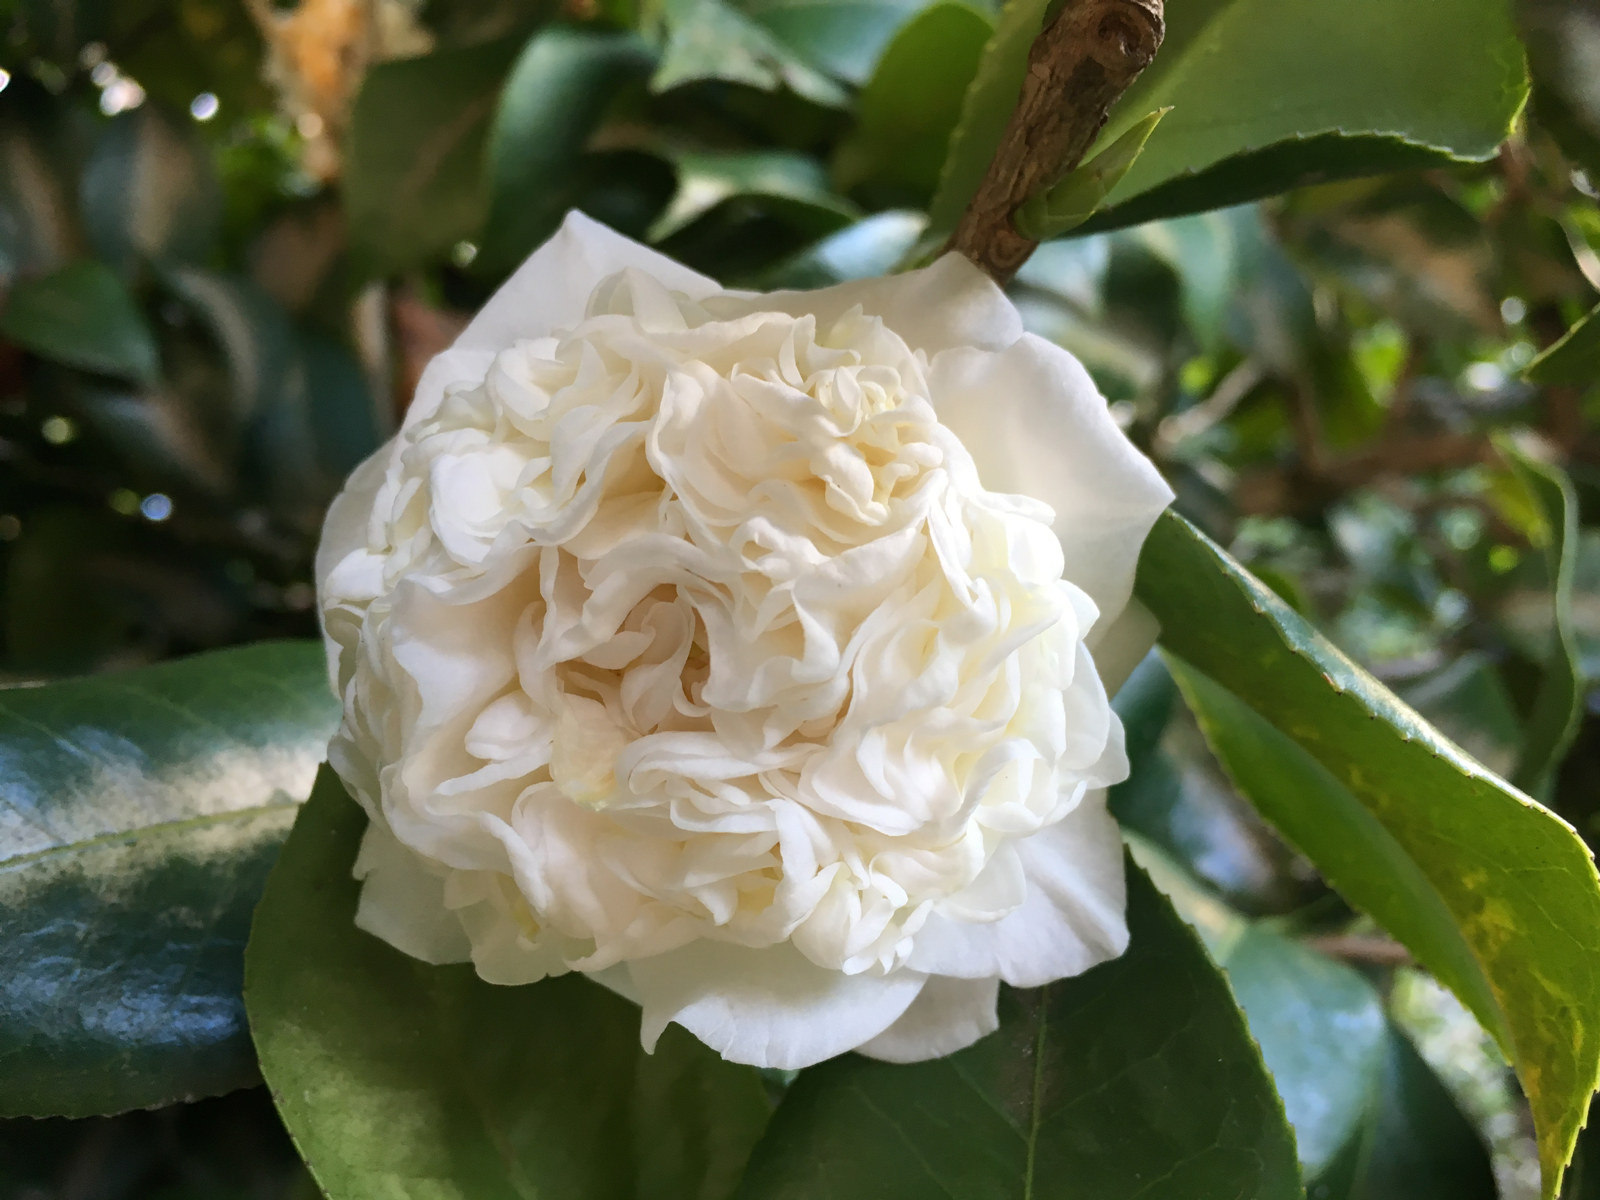 Camellia japonica 'Anemoneflora Alba' at Vaucluse House is known as the white waratah due to its colour and look